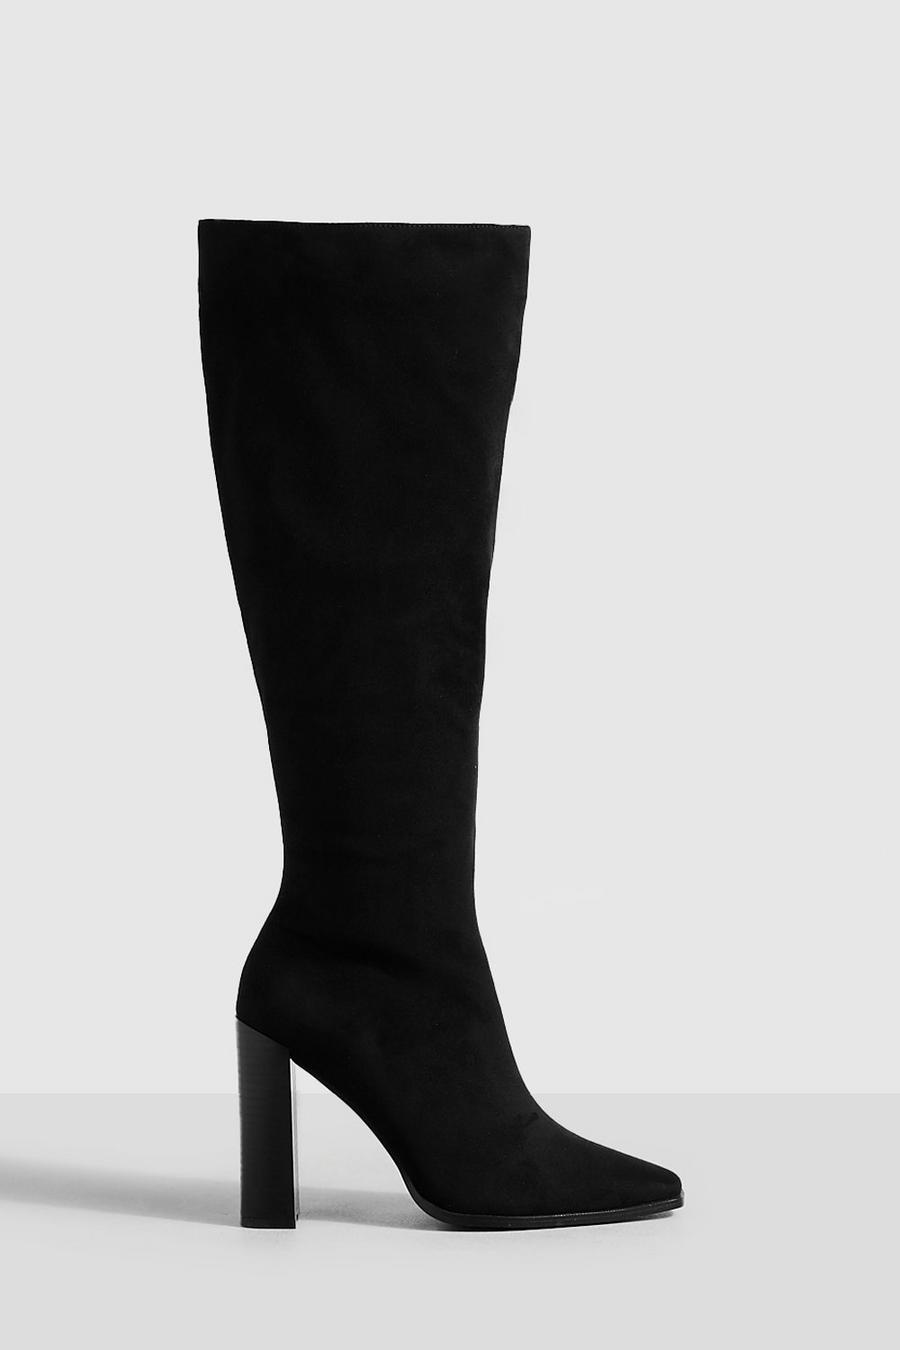 Black Stack Heel Square Toe Knee High Boots